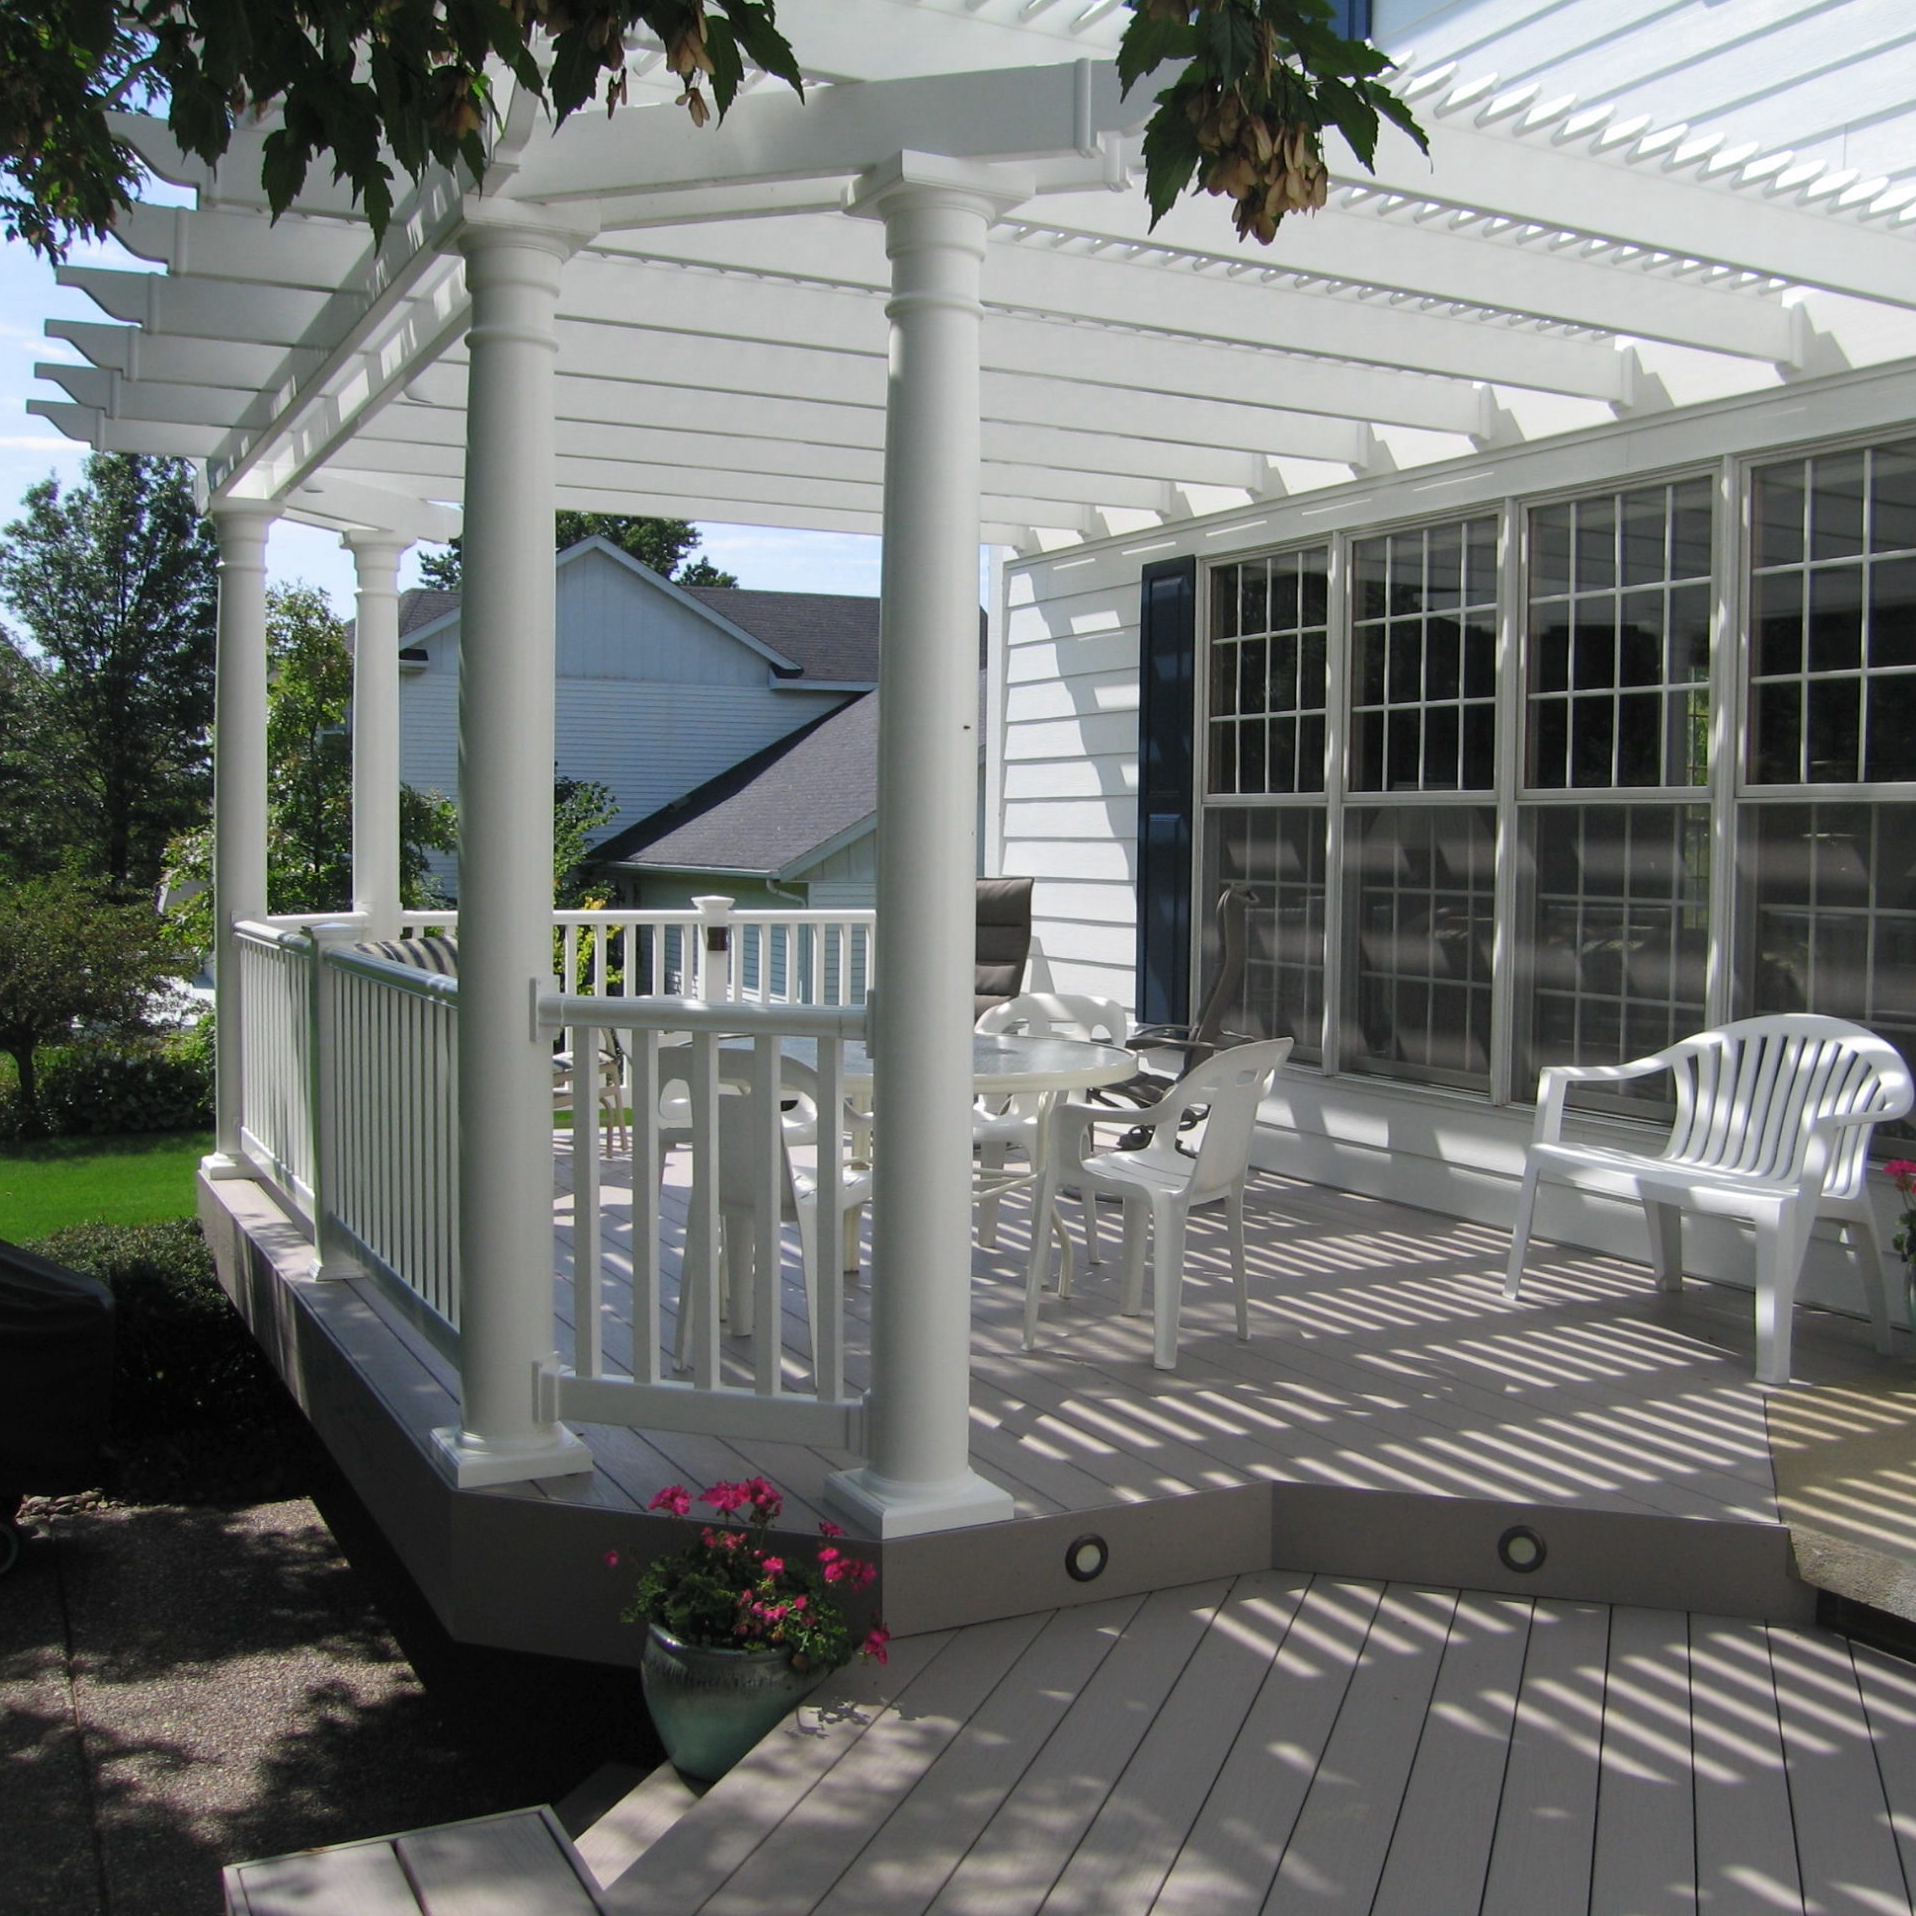 Picture of a white attached traditional pergola with 4 round posts and angled corners covering the patio just off a house with many windows